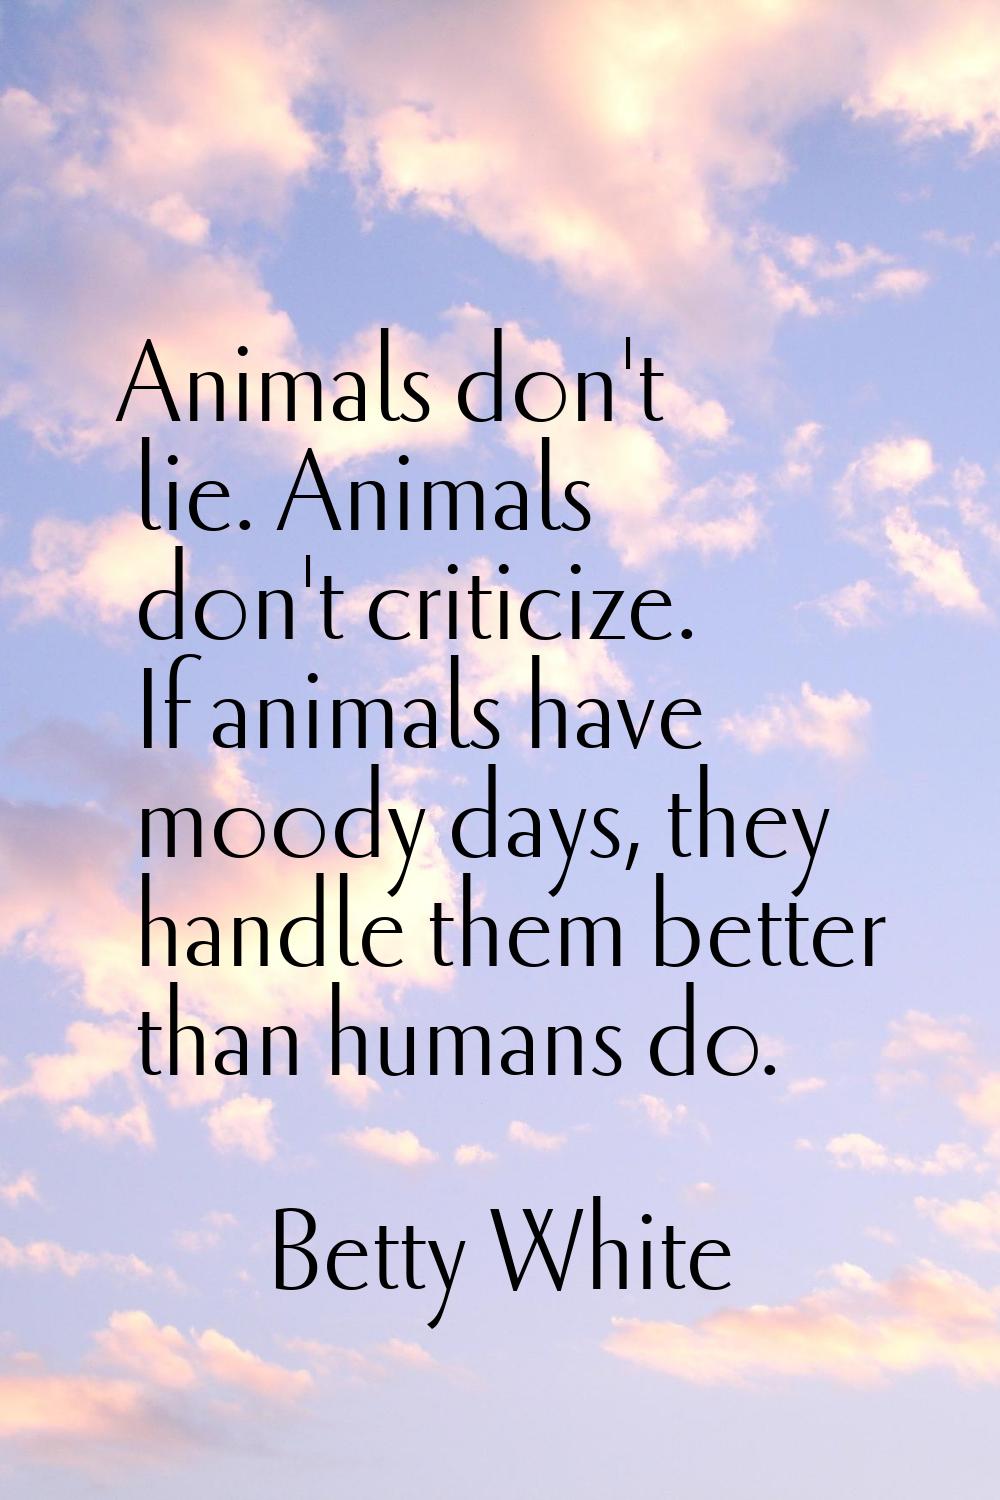 Animals don't lie. Animals don't criticize. If animals have moody days, they handle them better tha